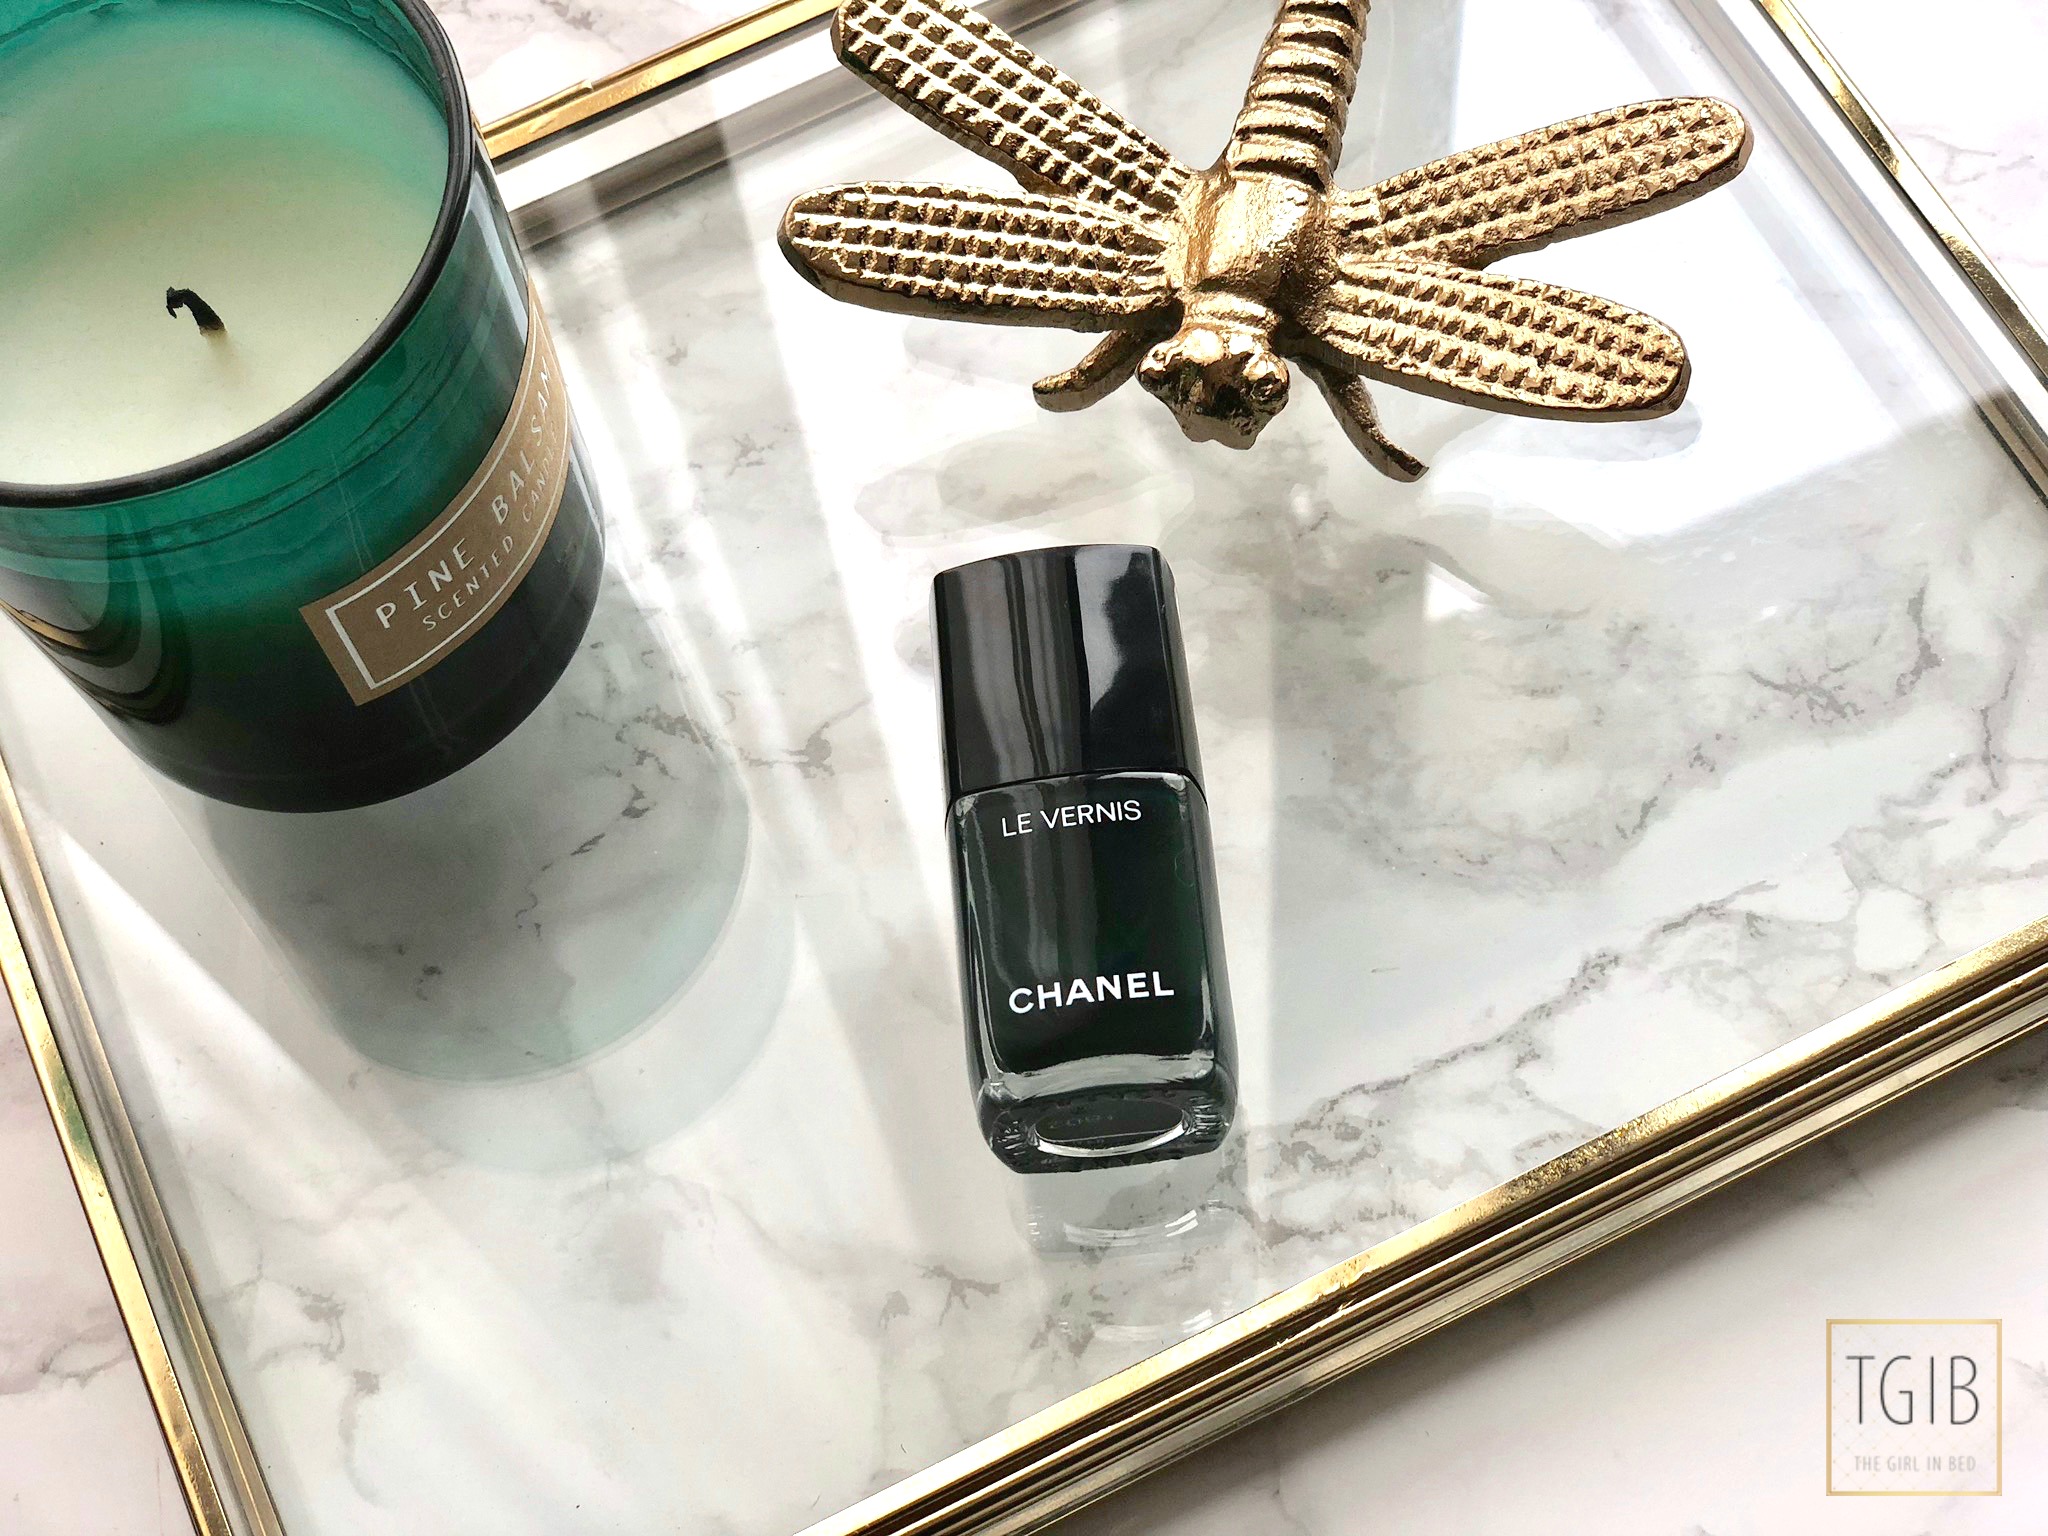 Chanel nail polish with ornament and a green candle